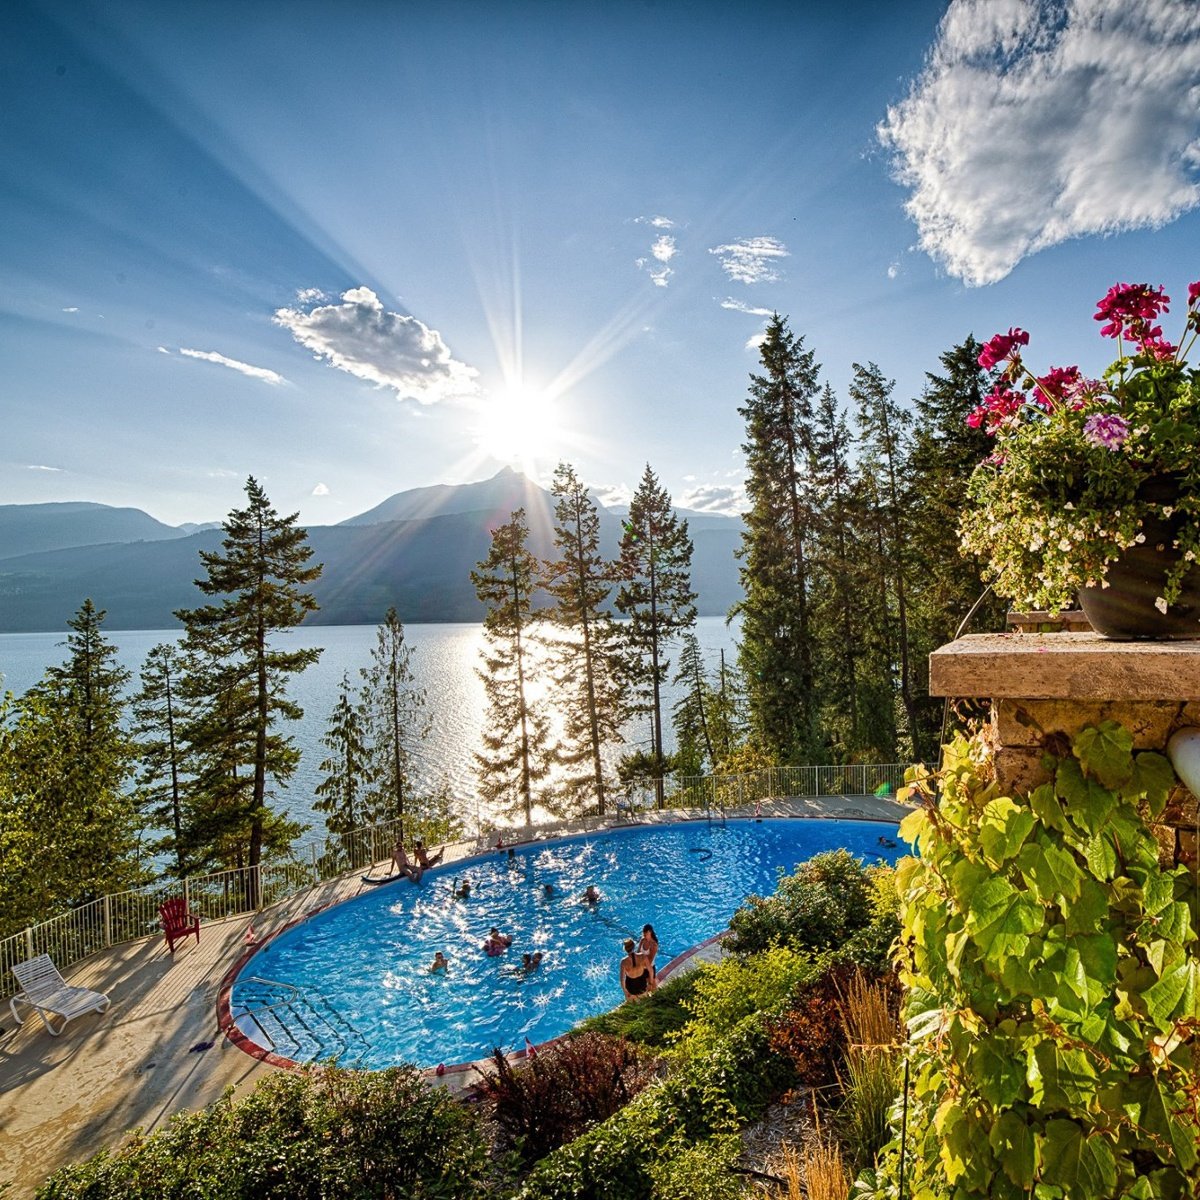 8 Best Hotel Pools in Canada for Families